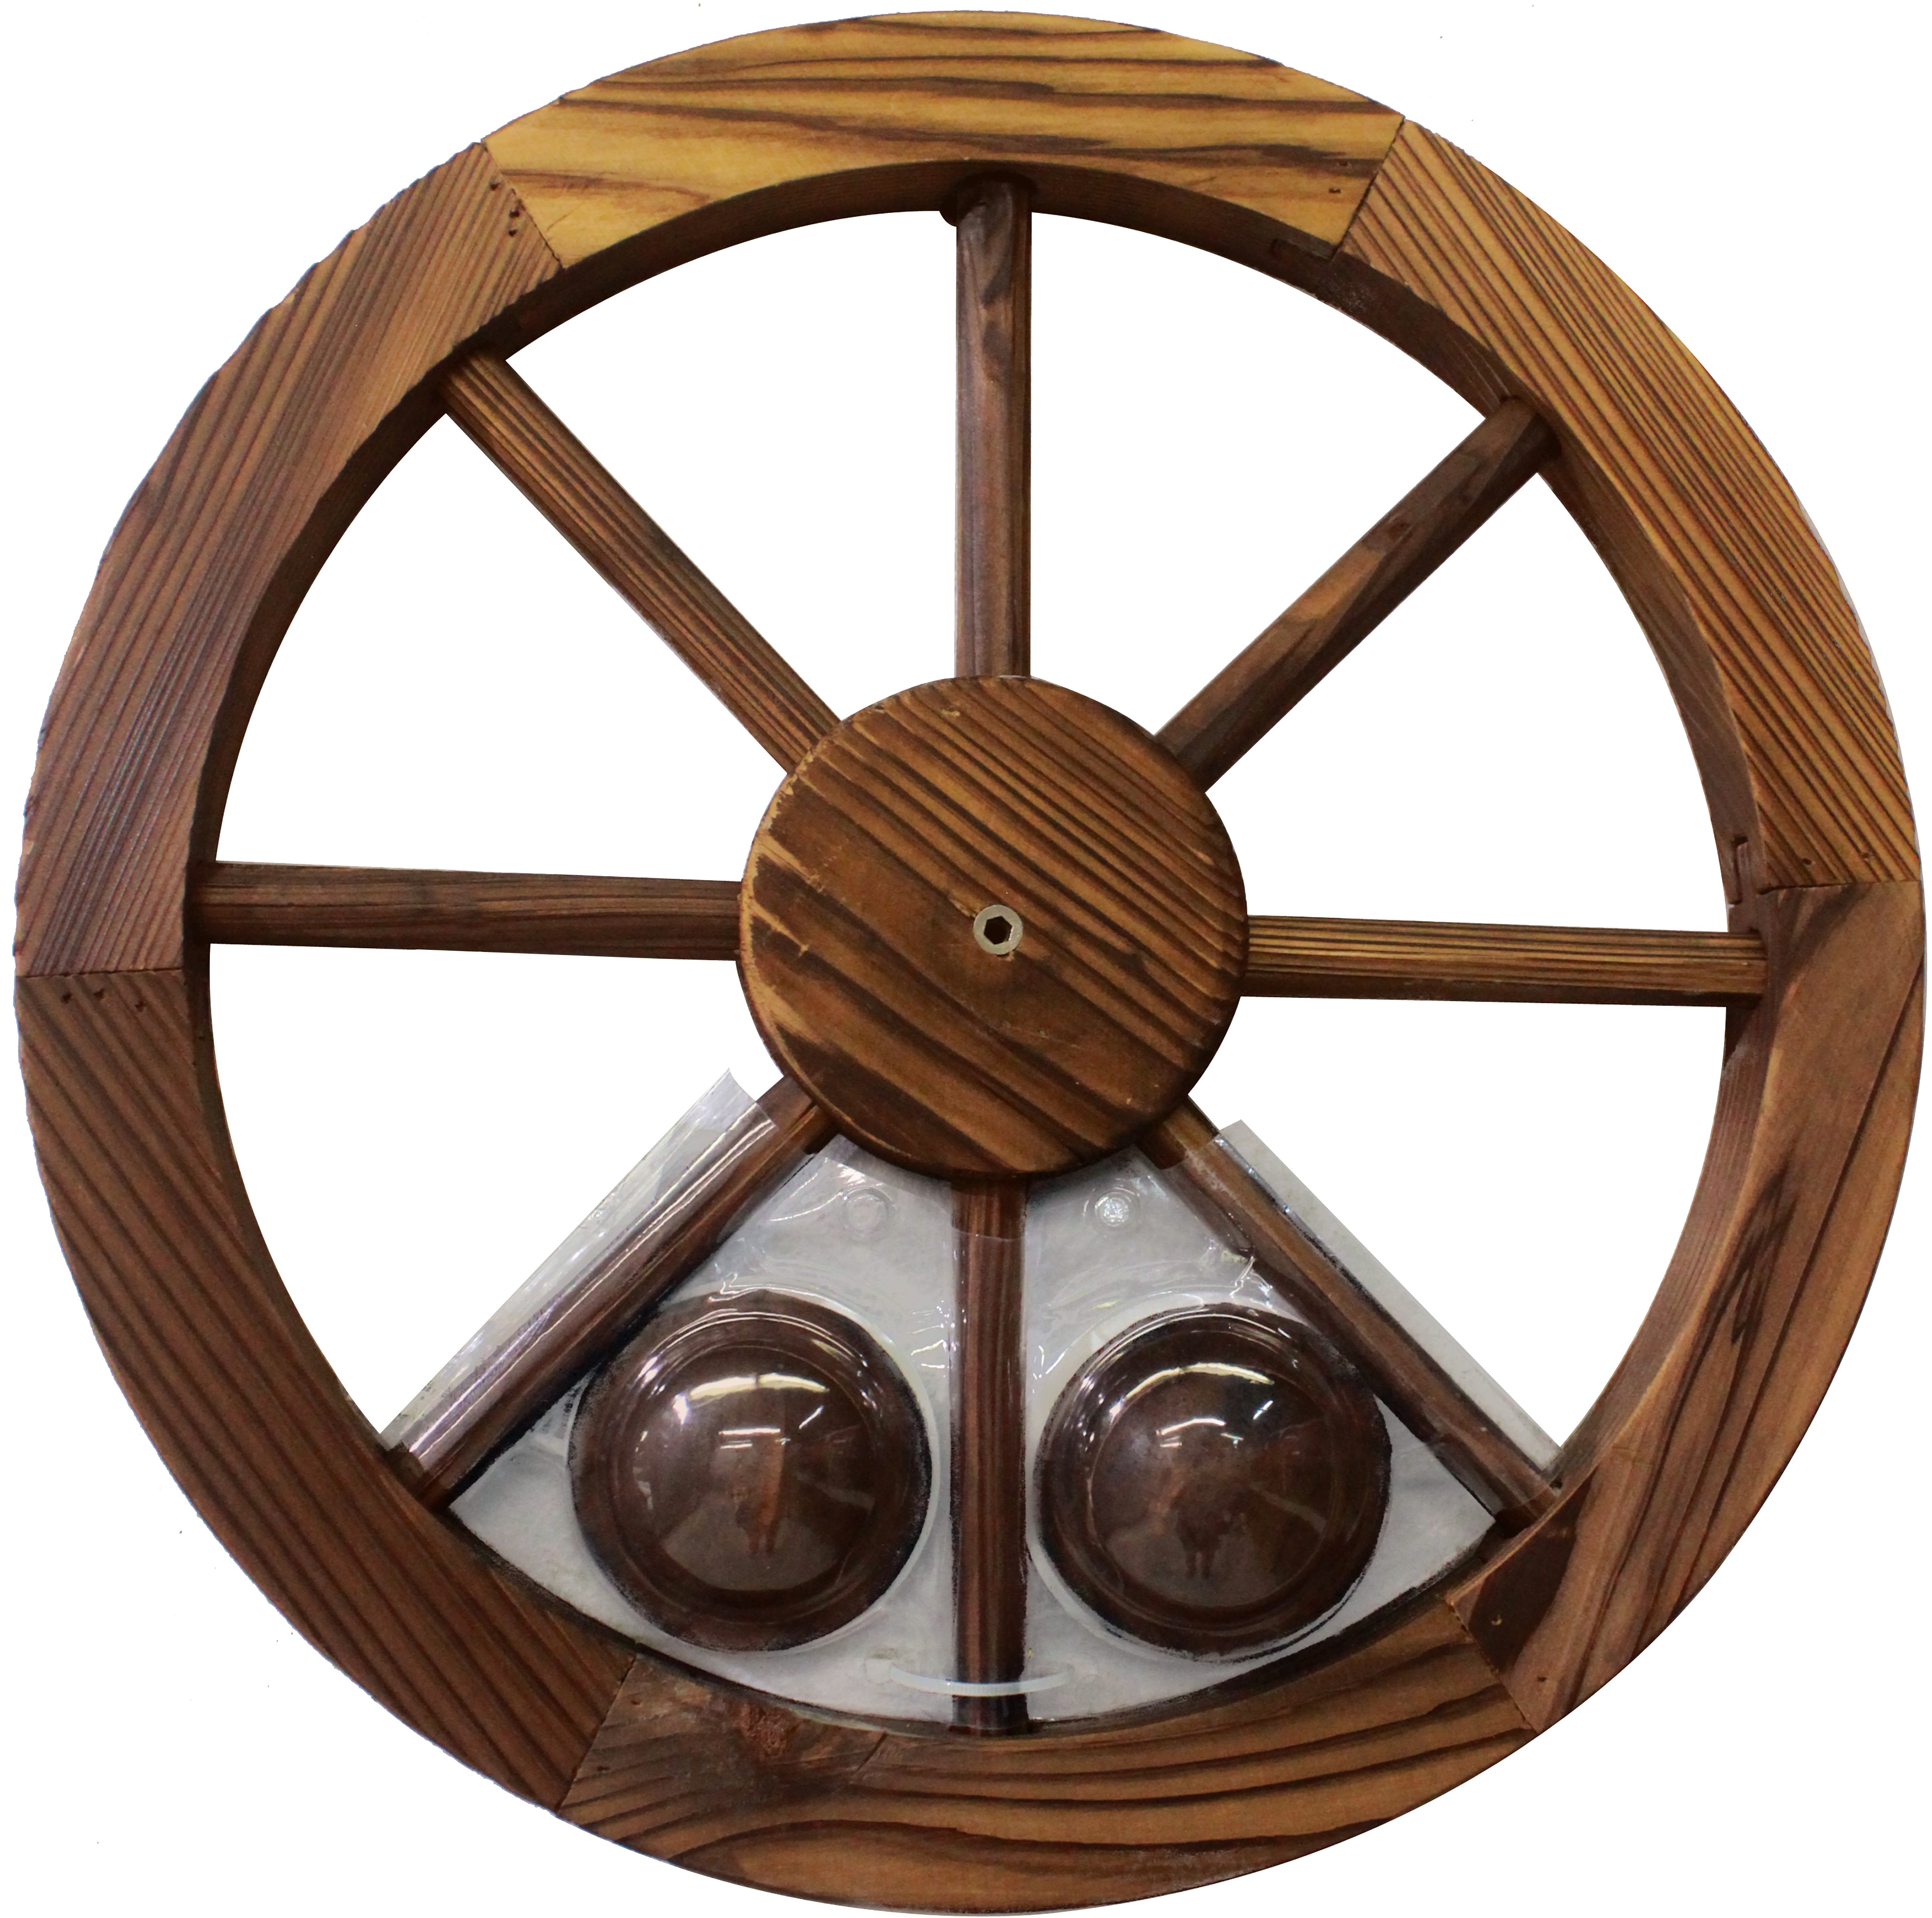 Leigh Country Eighteen Inch Decorative Wagon Wheel - image 3 of 7